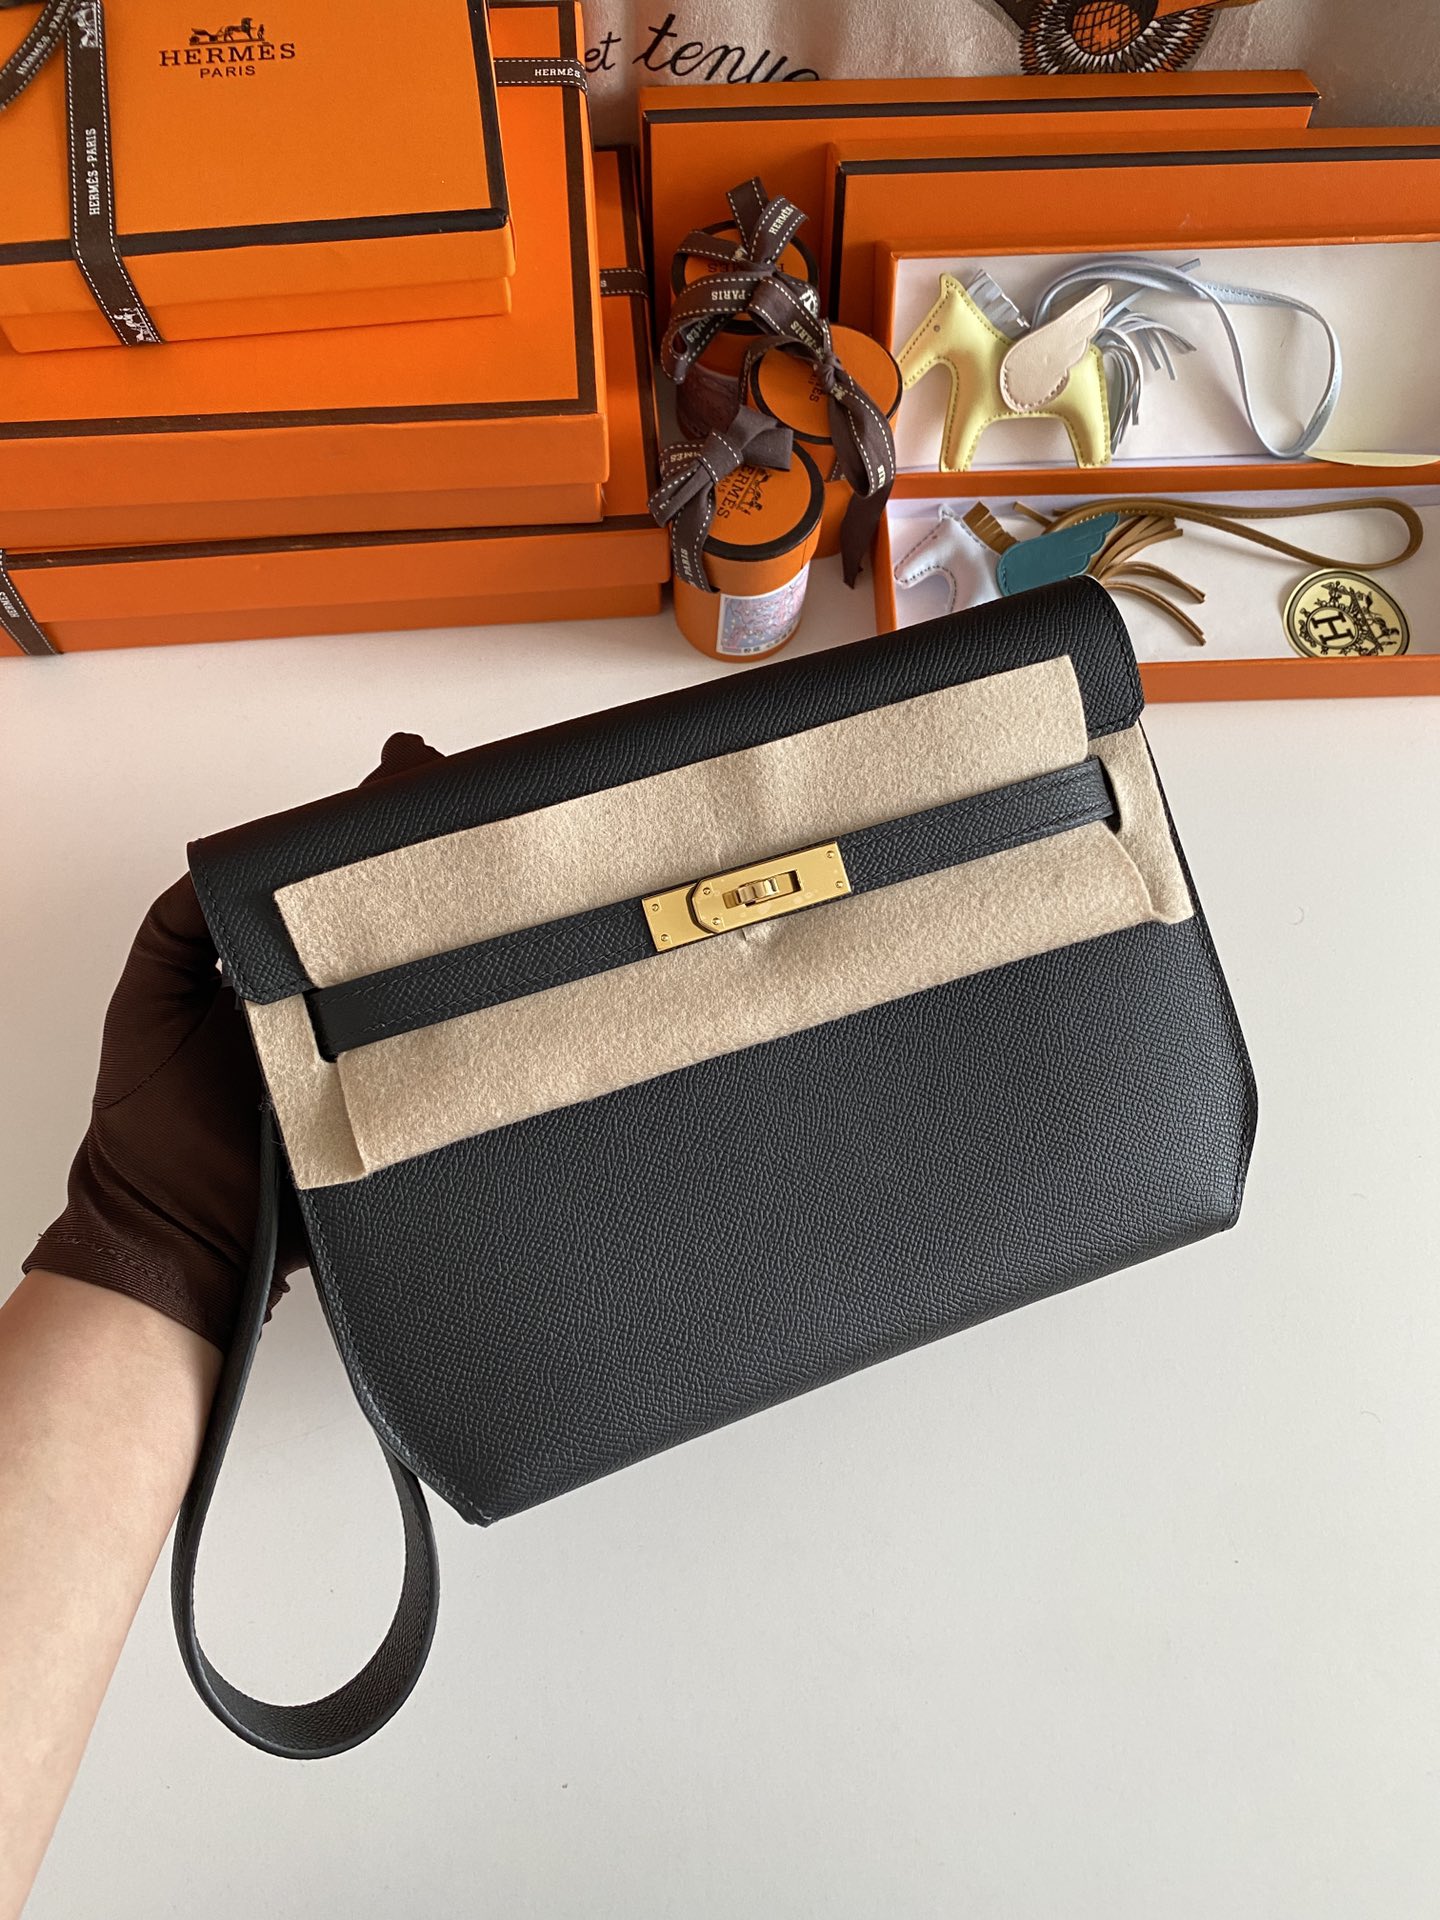 Hermes Kelly Sale
 Handbags Clutches & Pouch Bags Crossbody & Shoulder Bags Black Sewing Unisex Gold Hardware Epsom